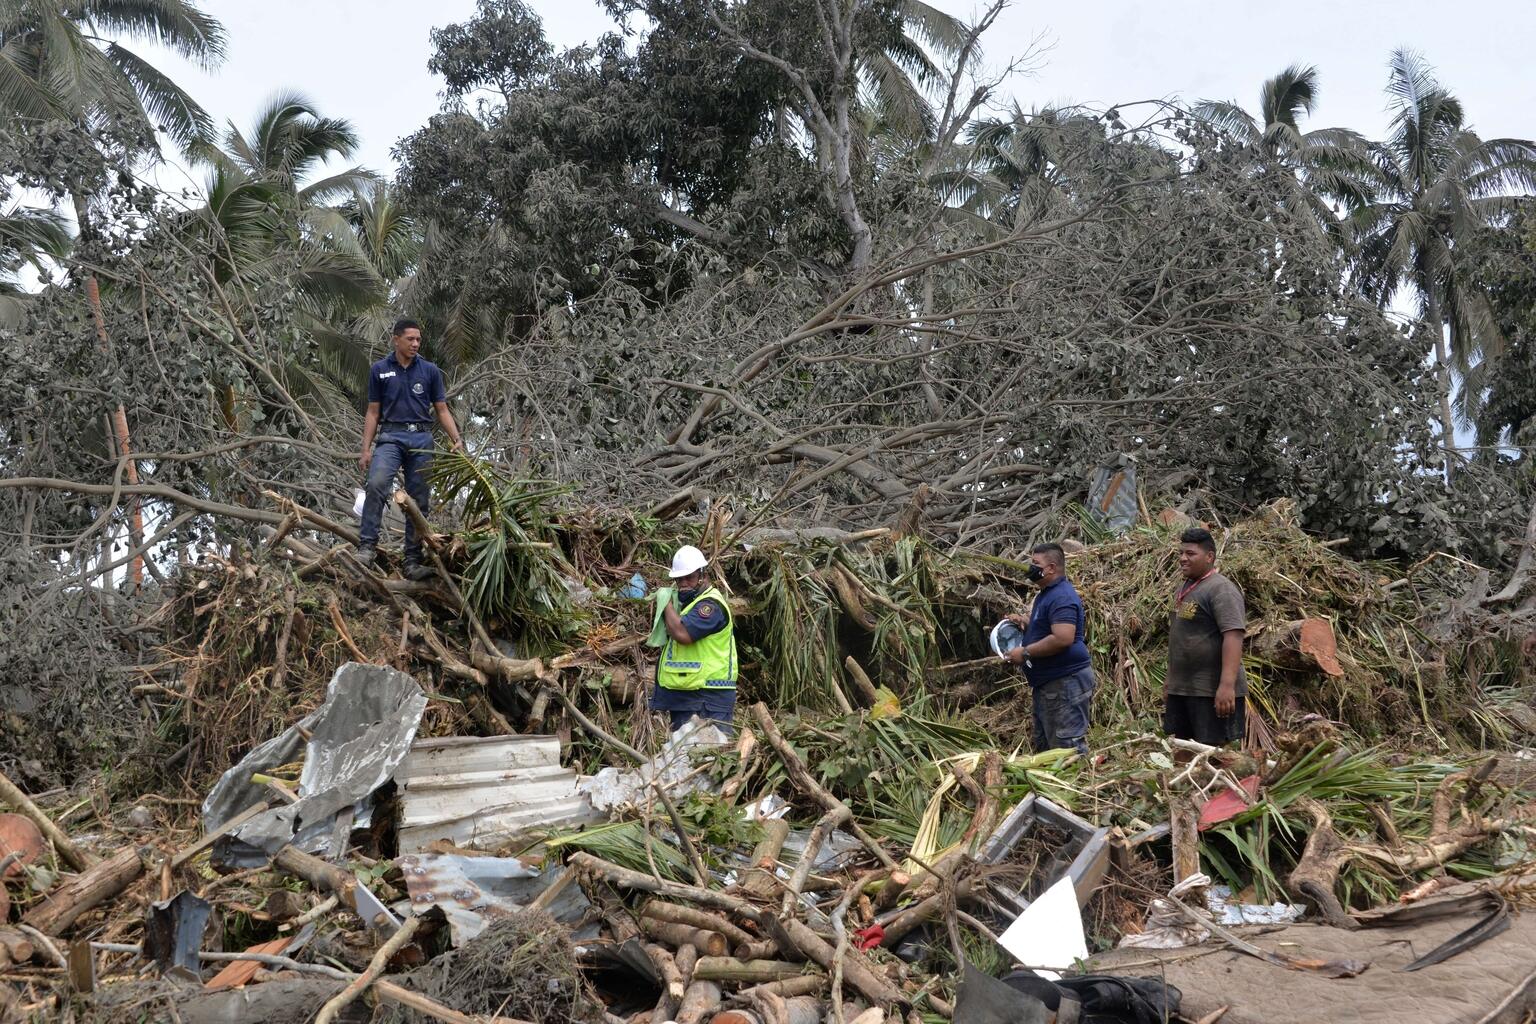 A group of people is working to move debris from the tsunami